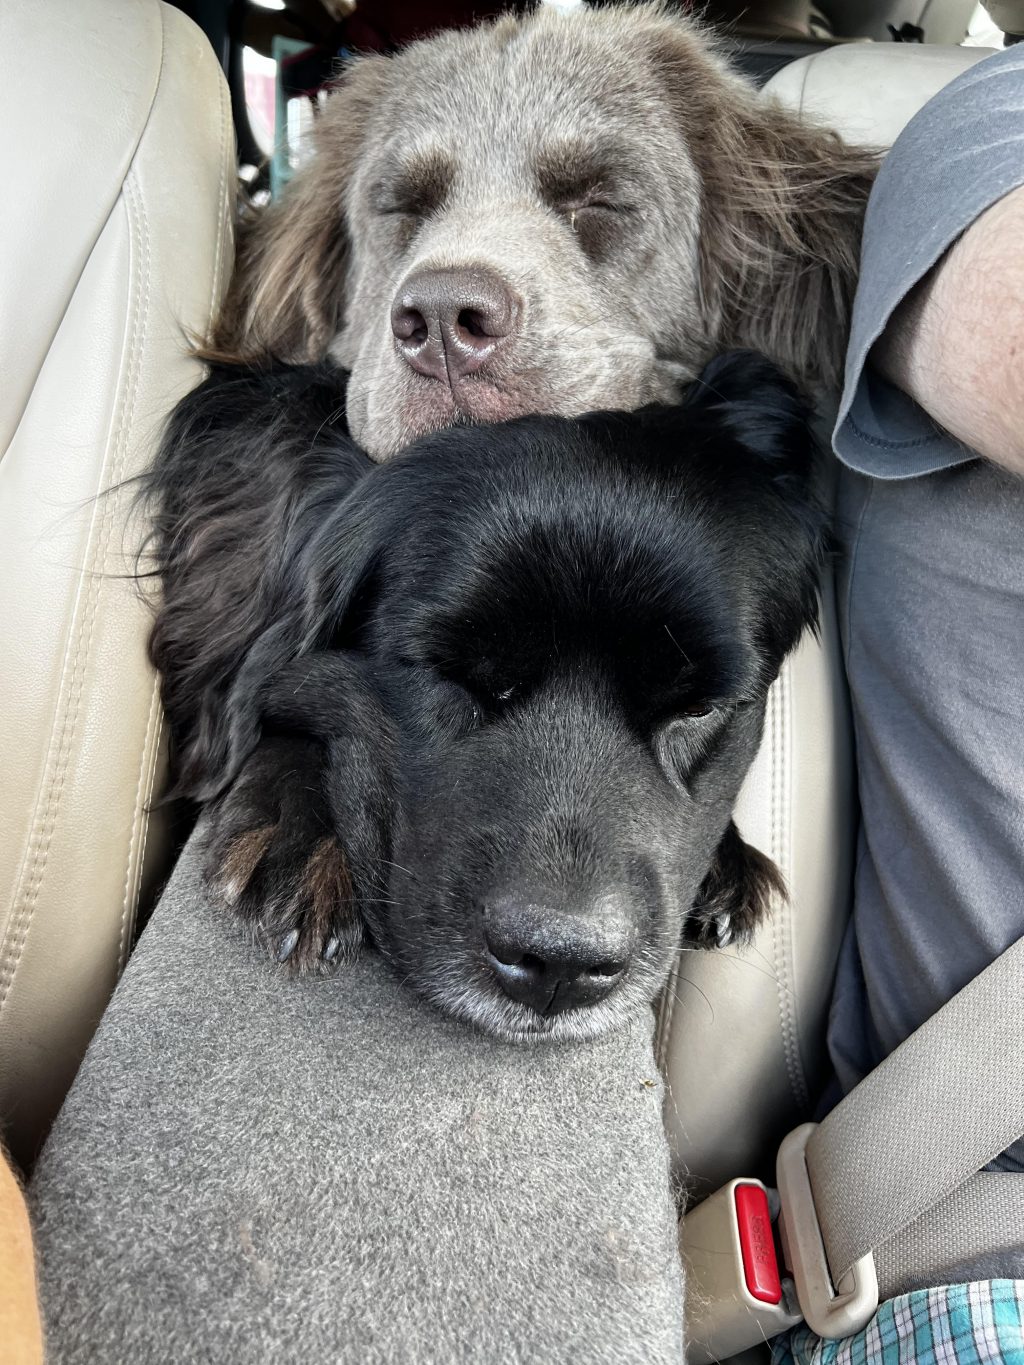 Road tripping is ruff